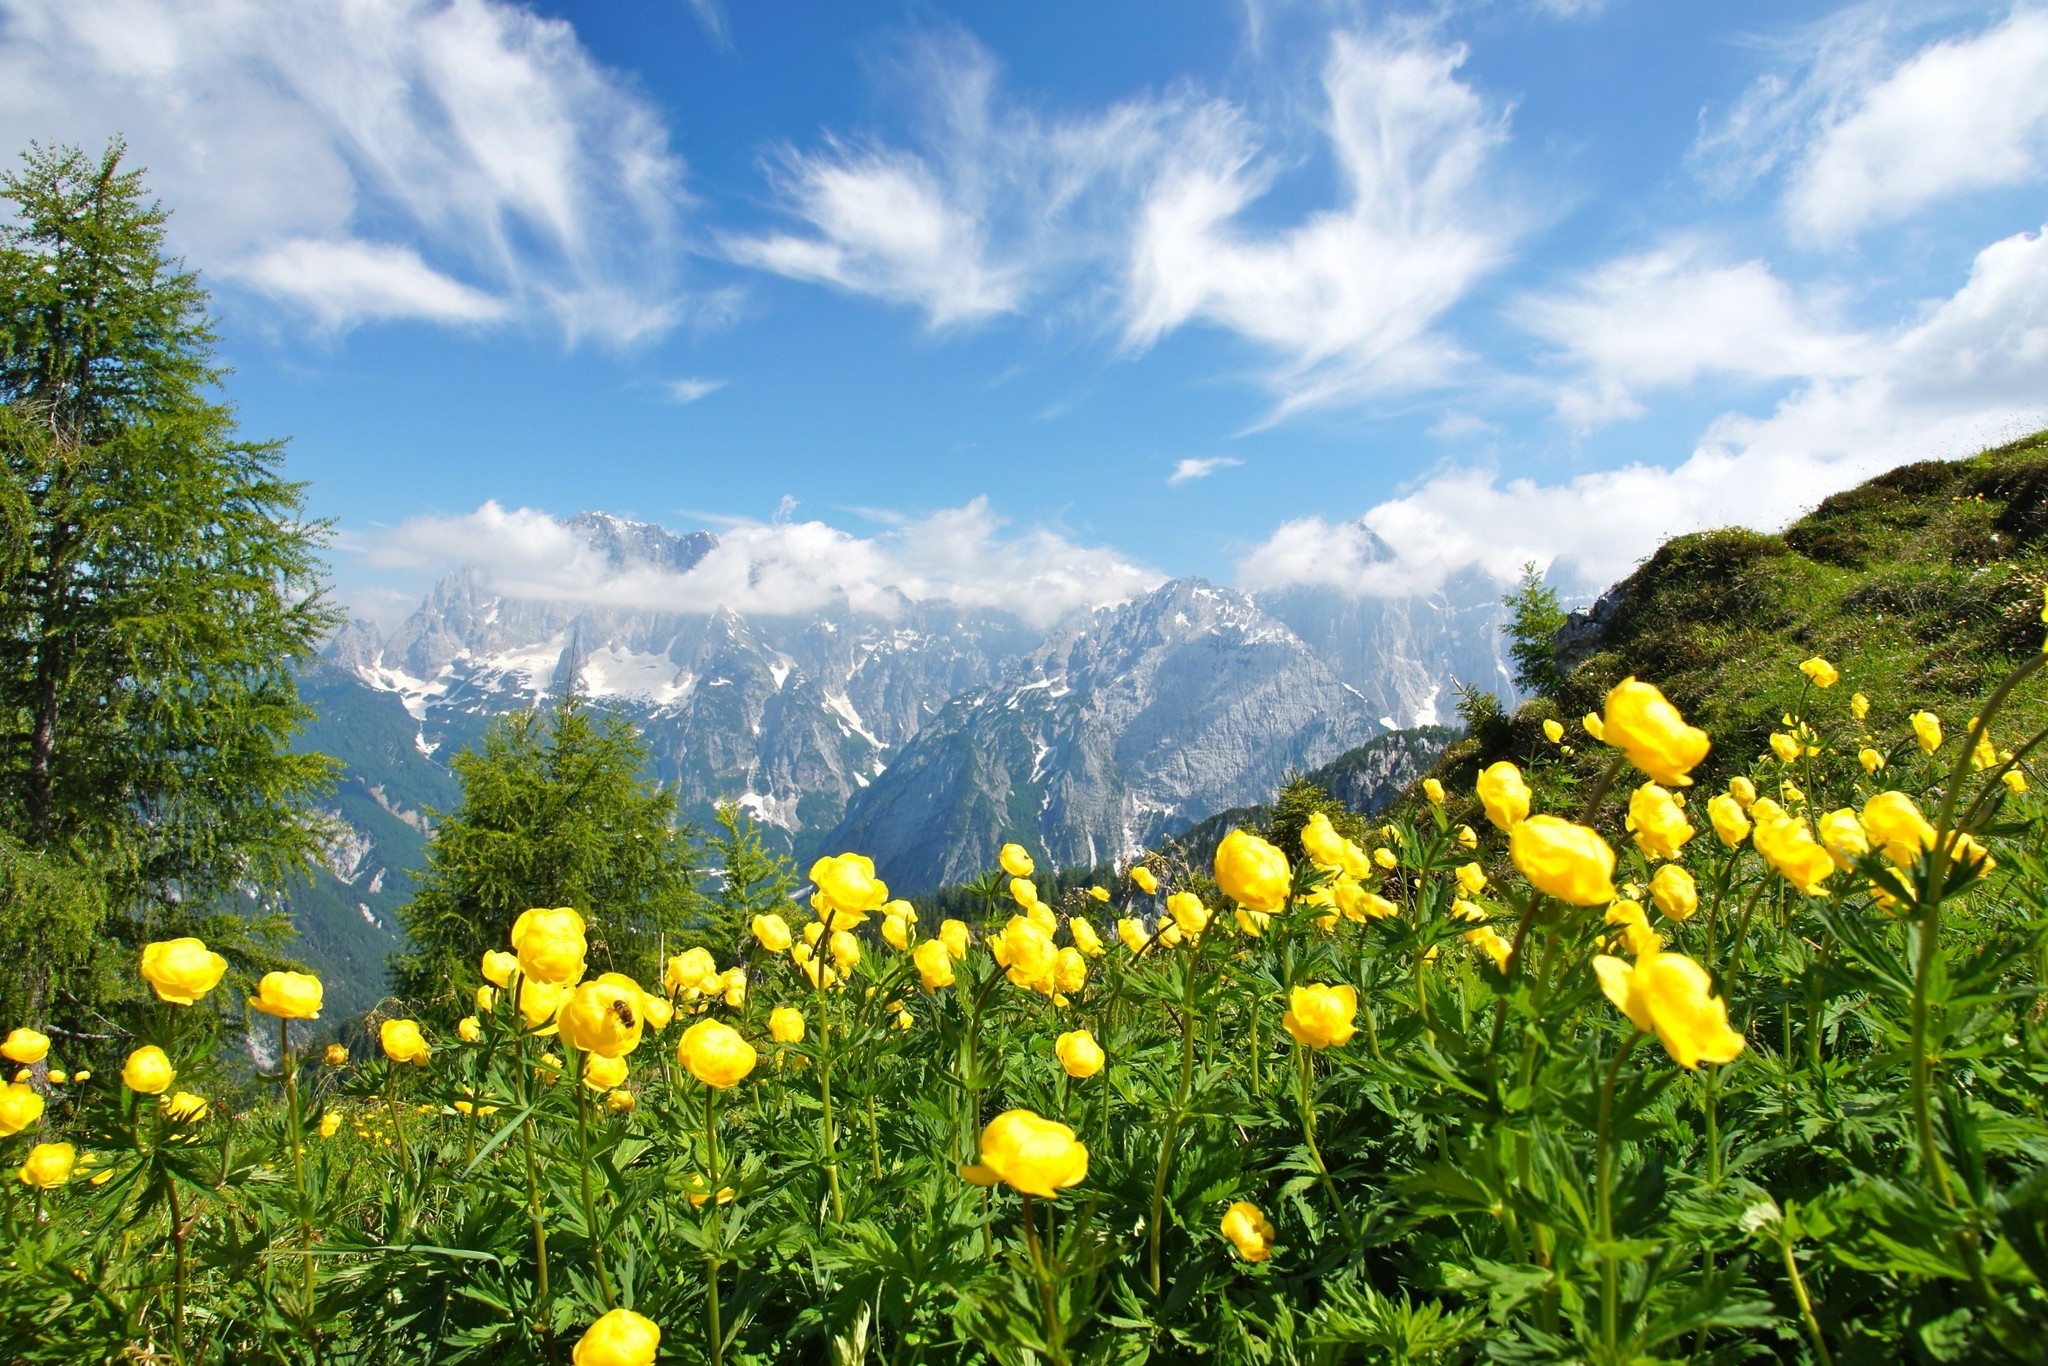 photography, Nature, Landscape, Summer, Wildflowers, Mountains, Clouds, Green, Yellow, Trees, Alps, Italy Wallpaper